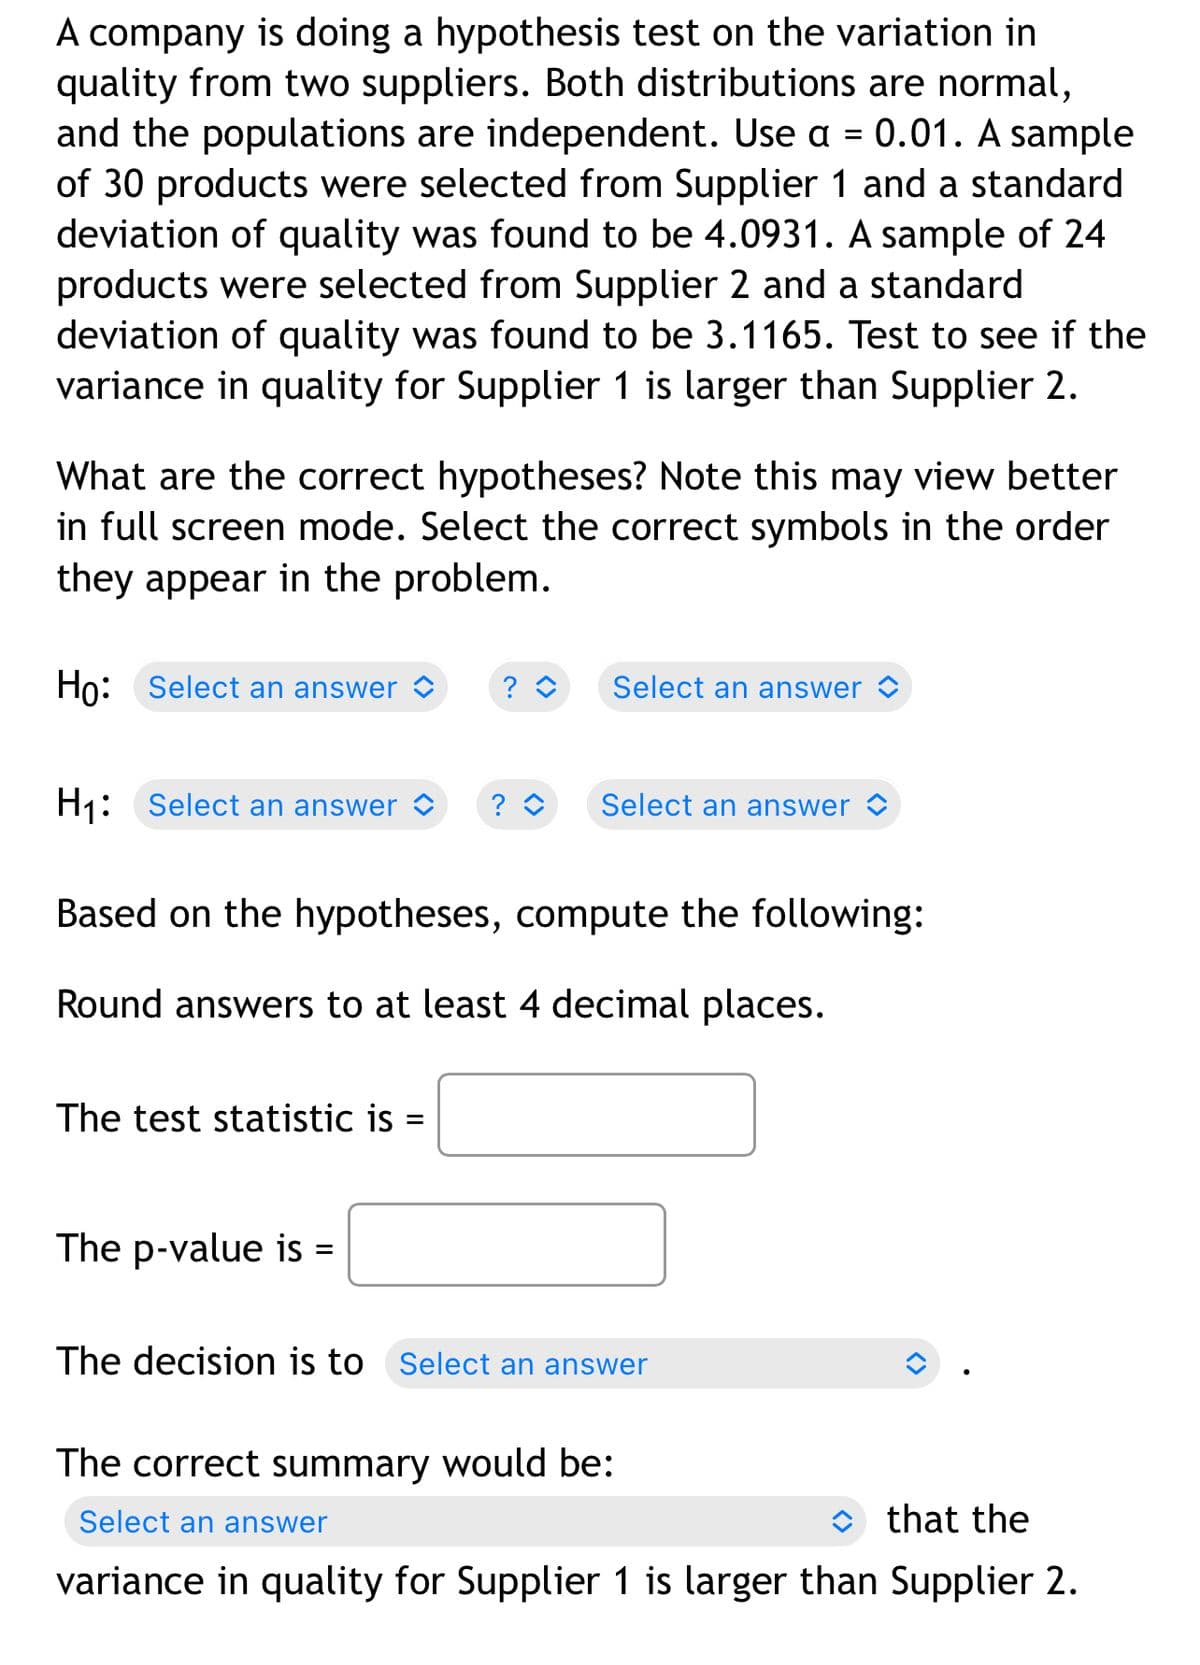 A company is doing a hypothesis test on the variation in
quality from two suppliers. Both distributions are normal,
and the populations are independent. Use a = 0.01. A sample
of 30 products were selected from Supplier 1 and a standard
deviation of quality was found to be 4.0931. A sample of 24
products were selected from Supplier 2 and a standard
deviation of quality was found to be 3.1165. Test to see if the
variance in quality for Supplier 1 is larger than Supplier 2.
What are the correct hypotheses? Note this may view better
in full screen mode. Select the correct symbols in the order
they appear in the problem.
Ho: Select an answer ✨ ? î
Select an answer
H₁: Select an answer ? ◊
Select an answer
Based on the hypotheses, compute the following:
Round answers to at least 4 decimal places.
The test statistic is
The p-value is
The decision is to Select an answer
The correct summary would be:
Select an answer
that the
variance in quality for Supplier 1 is larger than Supplier 2.